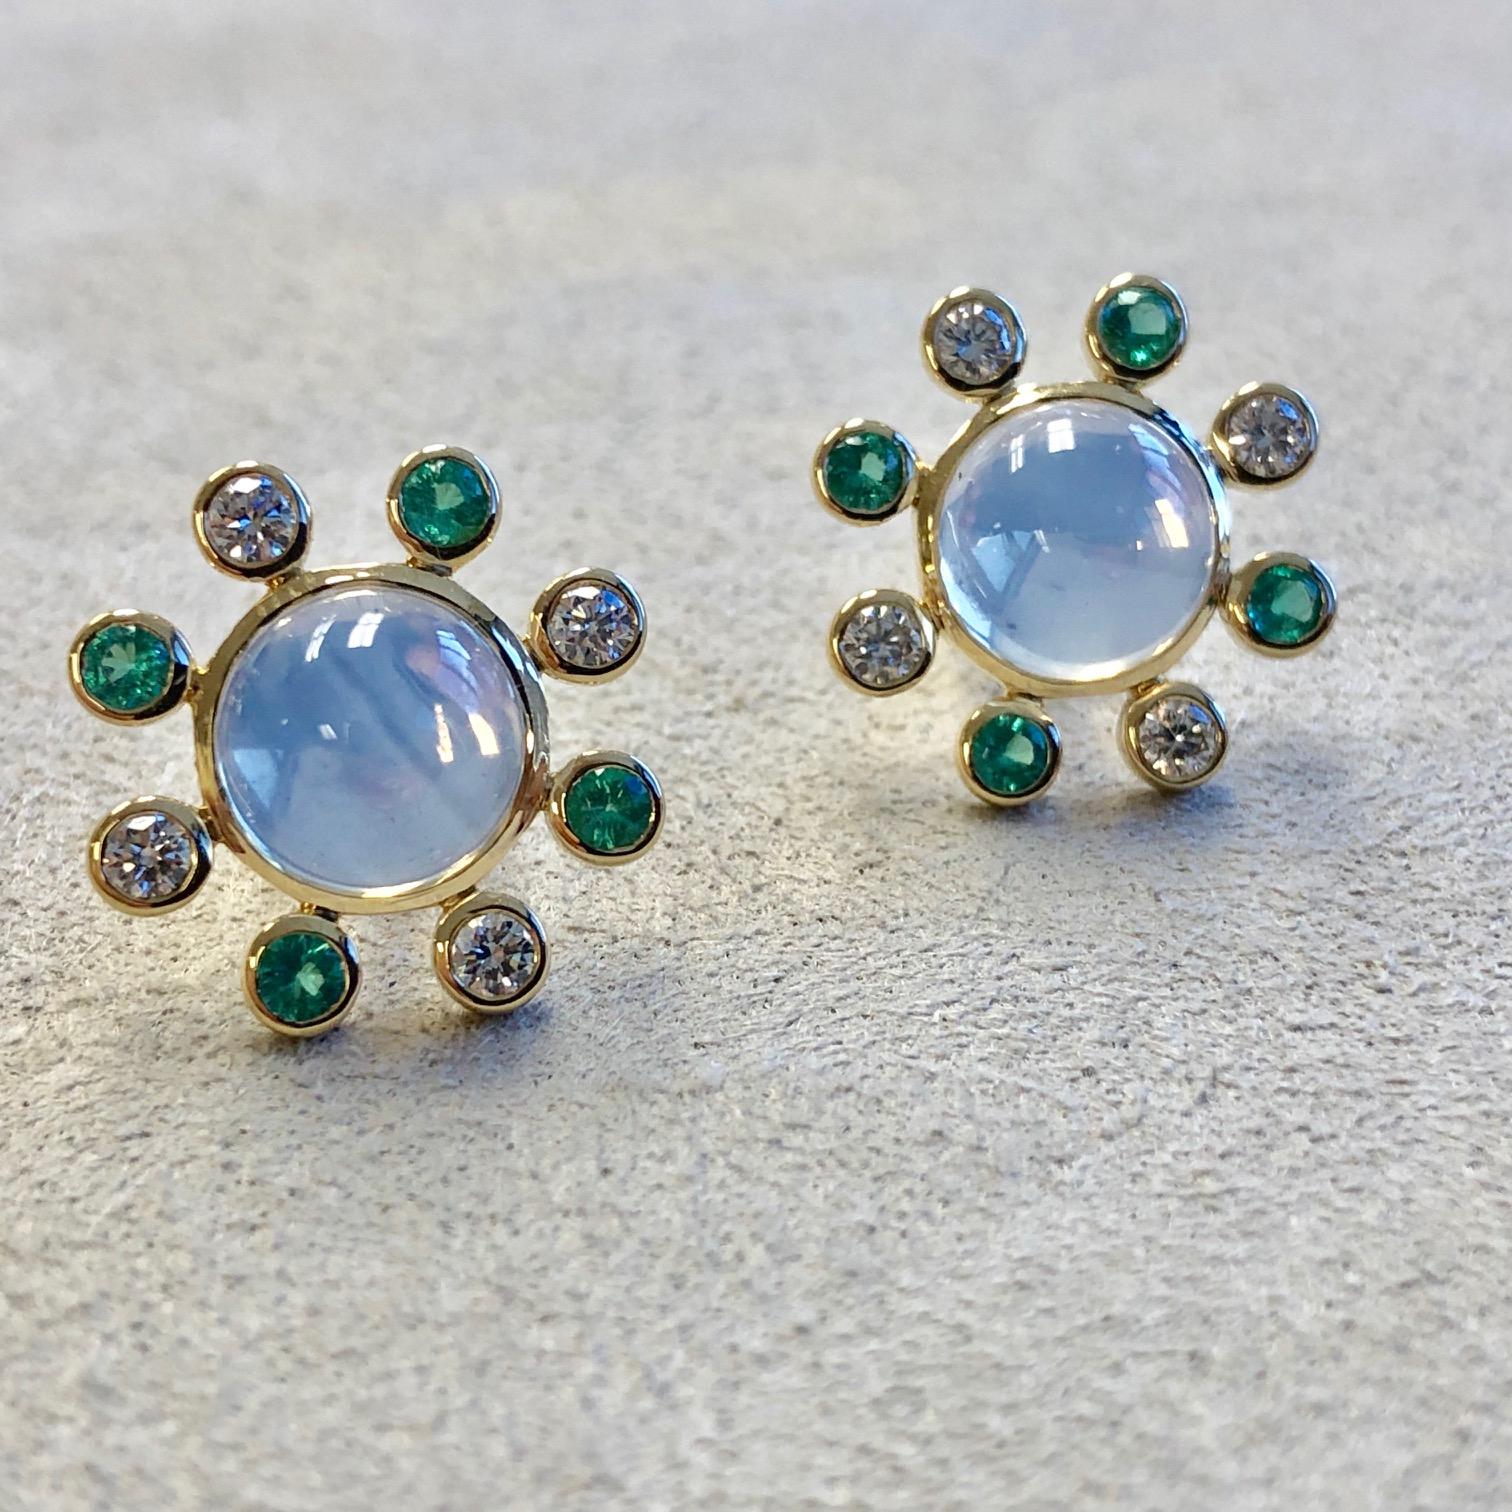 Created in 18 karat yellow gold
Moon quartz 4 cts approx
Emeralds 0.35 ct approx
Diamonds 0.40 cts approx
Limited edition

Adorn yourself with a timeless treasure with our exclusive Candy Blue Topaz & Diamond Earrings. Handcrafted from shimmering 18